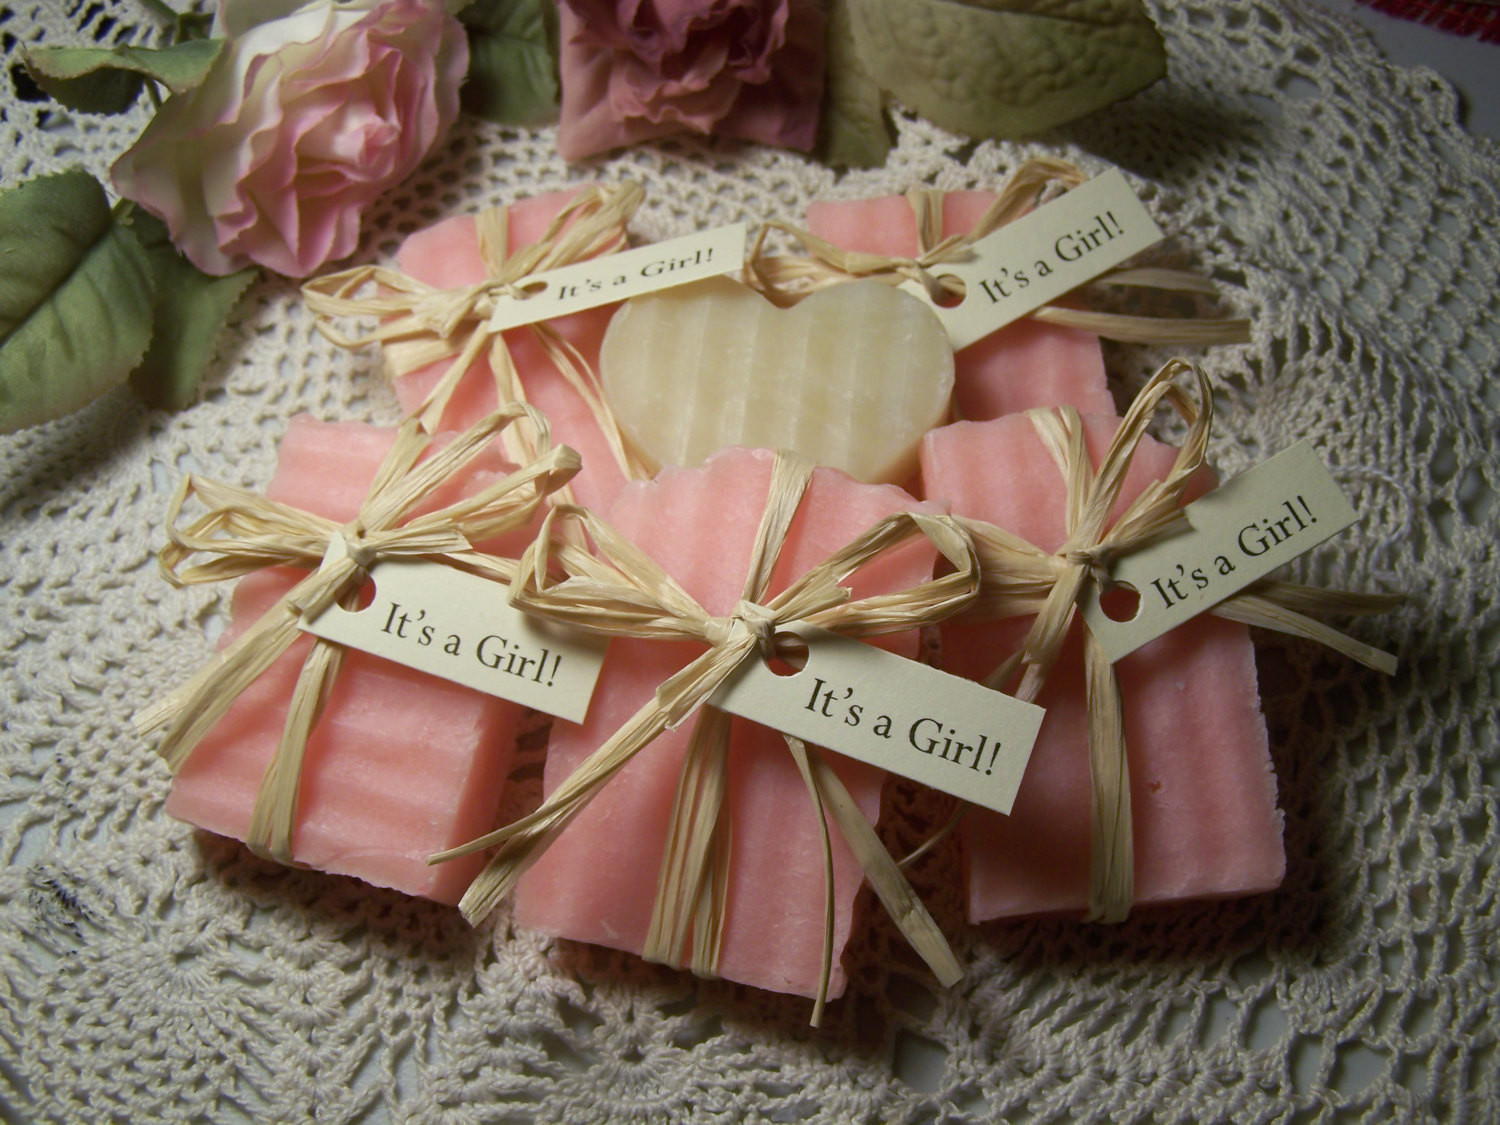 Party Favors For Baby Girl Shower
 It s a Girl Baby shower favors mini soaps 30 soaps